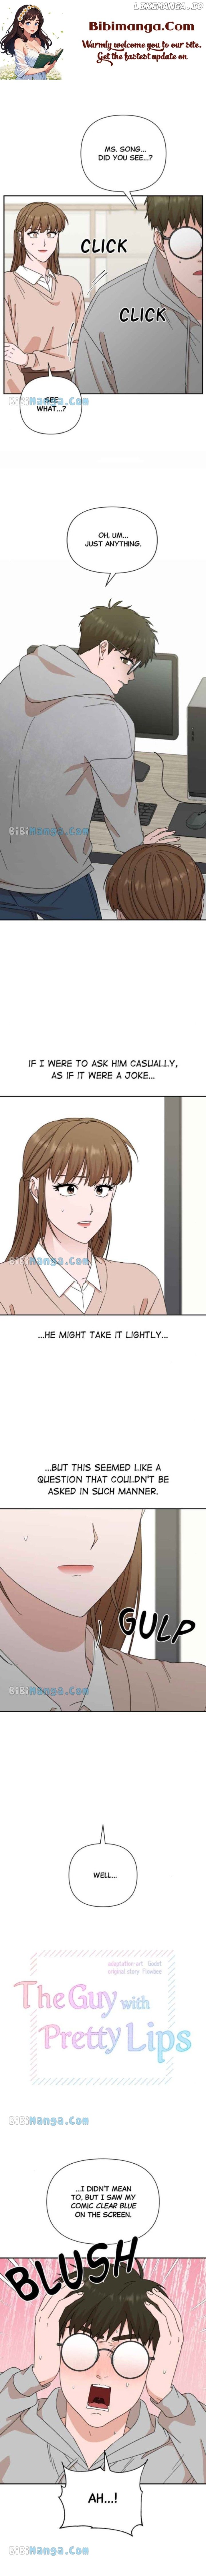 The Man with Pretty Lips Chapter 89 - Page 1